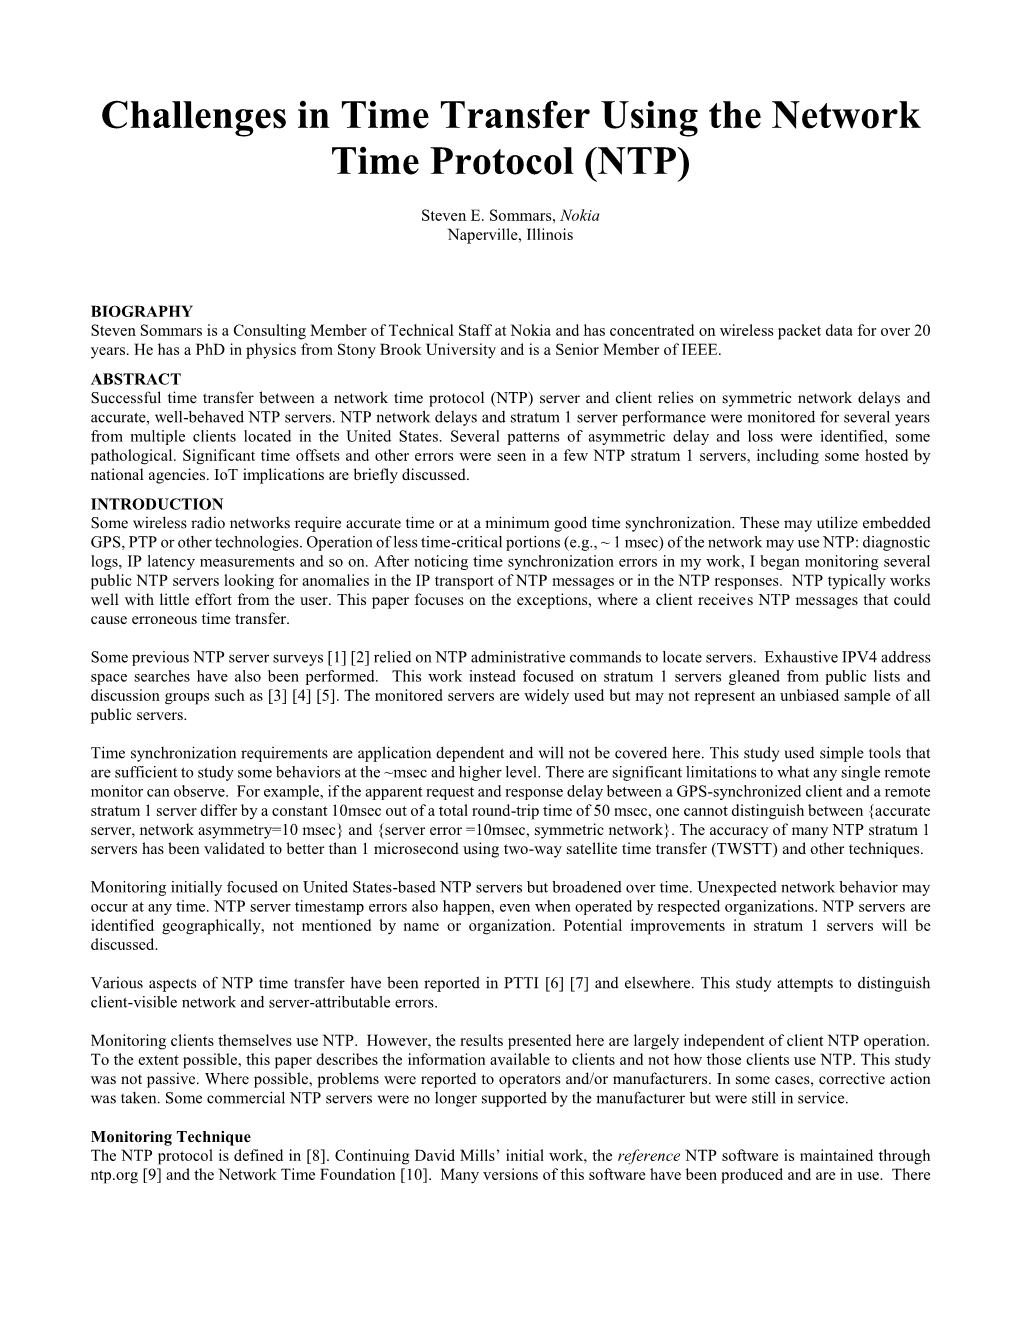 Challenges in Time Transfer Using the Network Time Protocol (NTP)